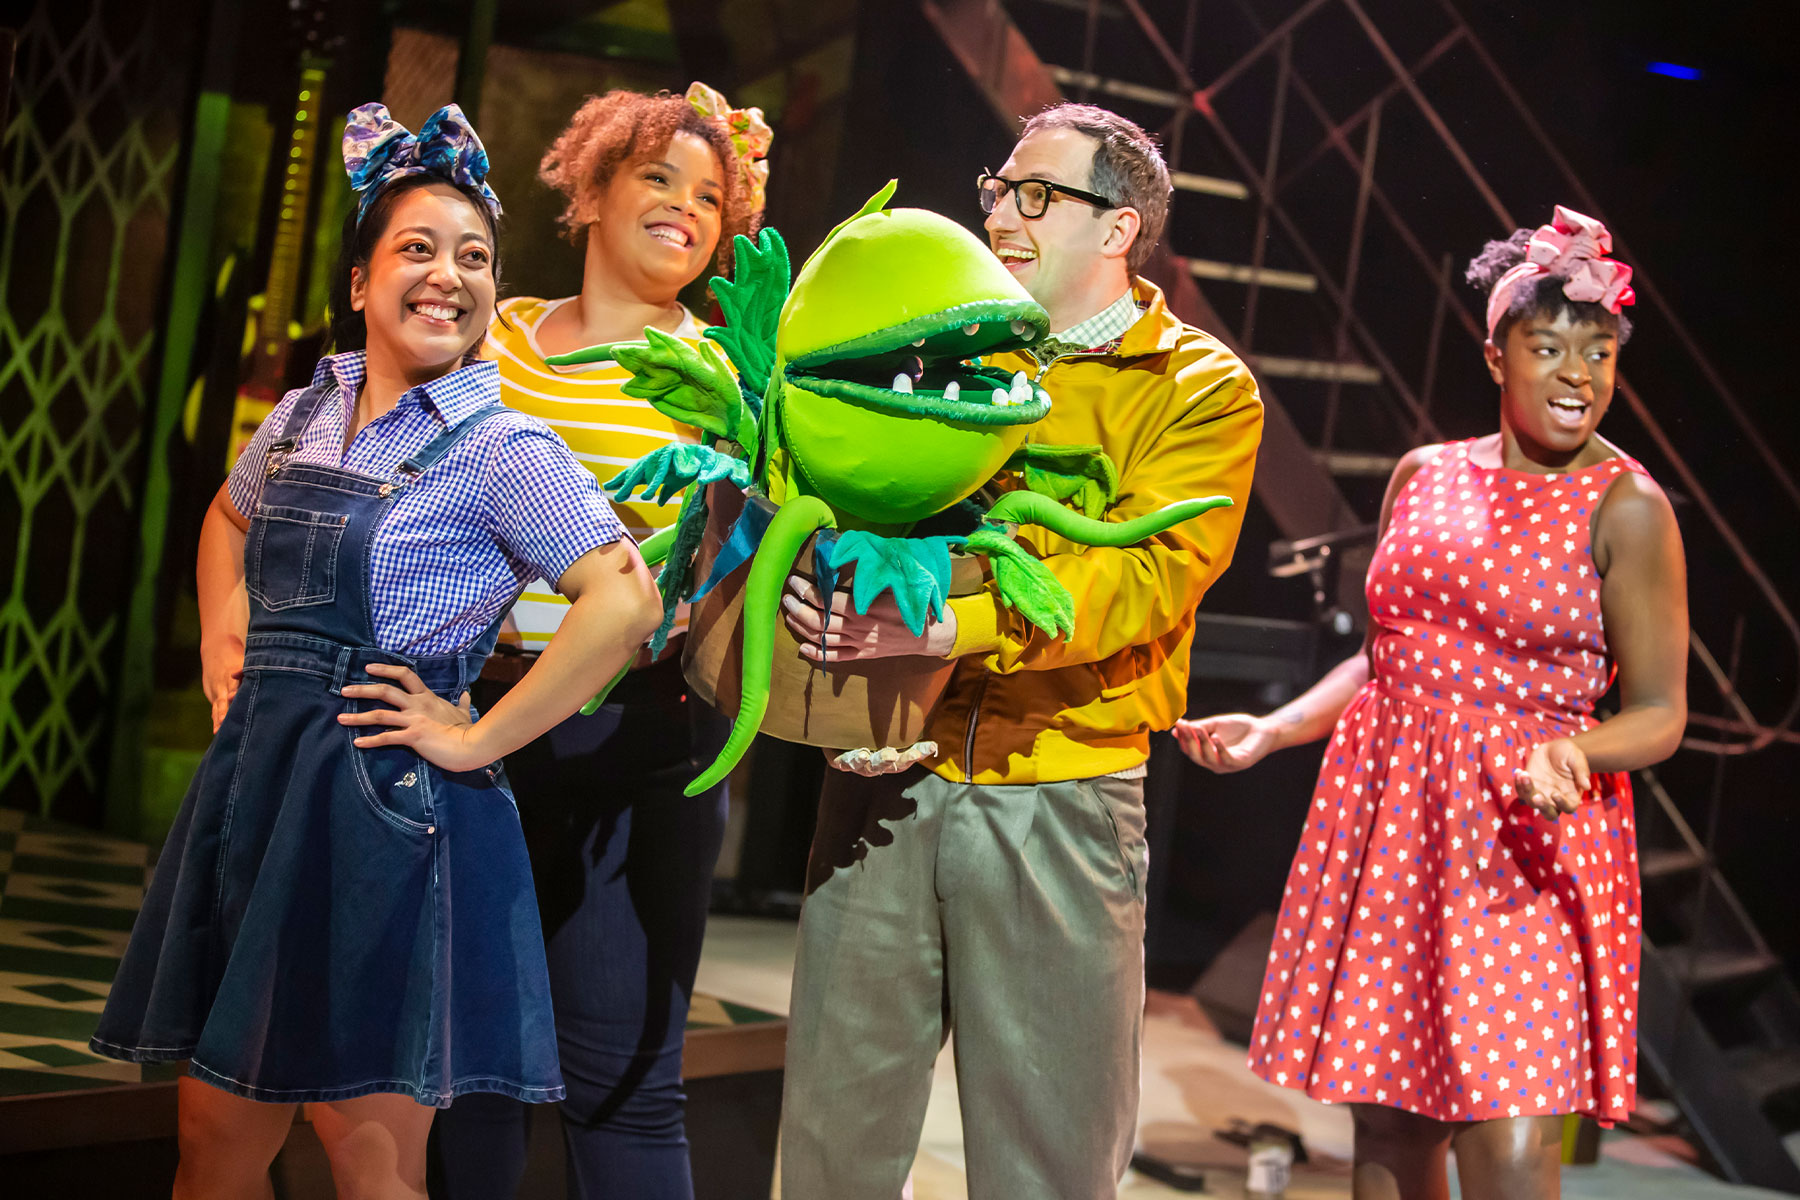 Janna May, Zweyla Mitchell Dos Santos, Oliver Mawdsley and Chardai Shaw in a scene from Little Shop of Horrors